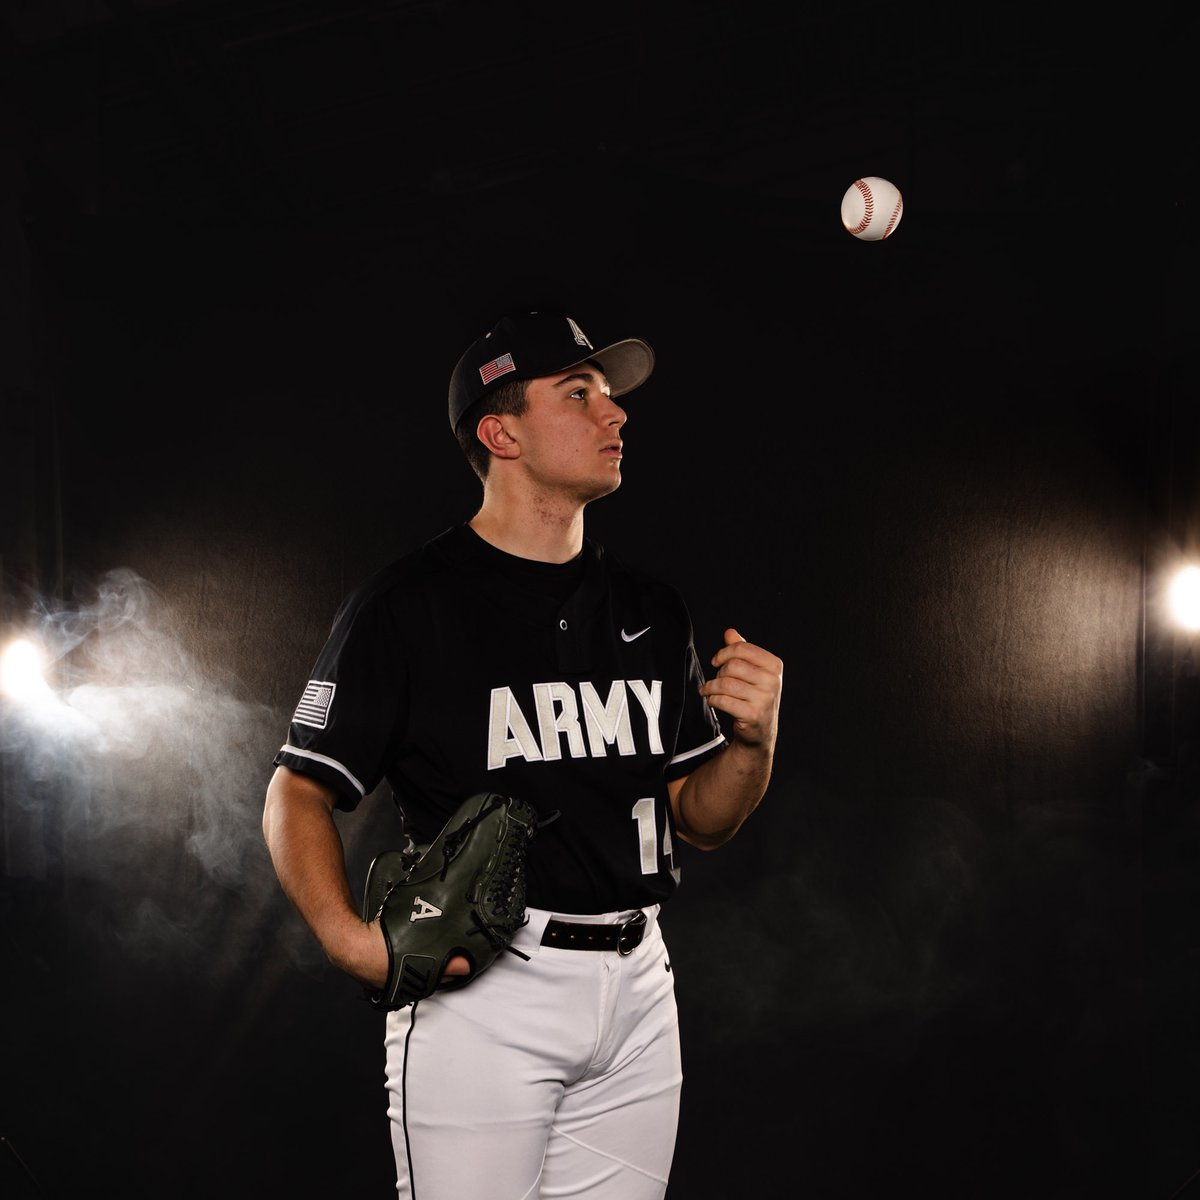 Luke Marino is on to pitch the 9th. It's the Croton-on-Hudson native's Black Knight career debut! M9 | Army 10, Monmouth 1